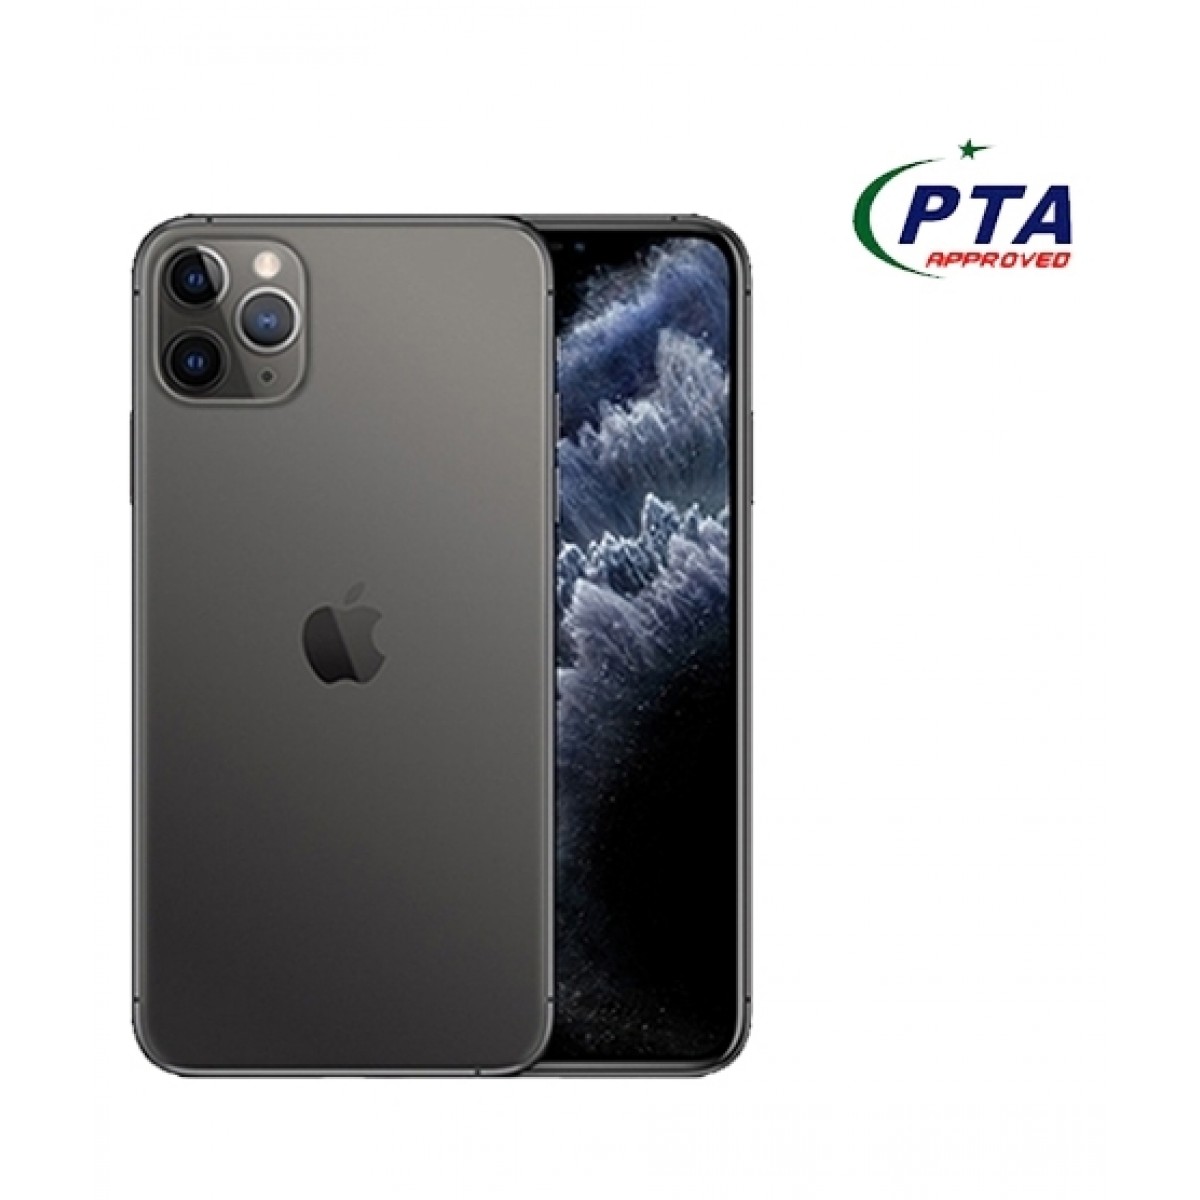 Search Results For Iphone 11 Pro Max Online Secure Shopping In Pakistan